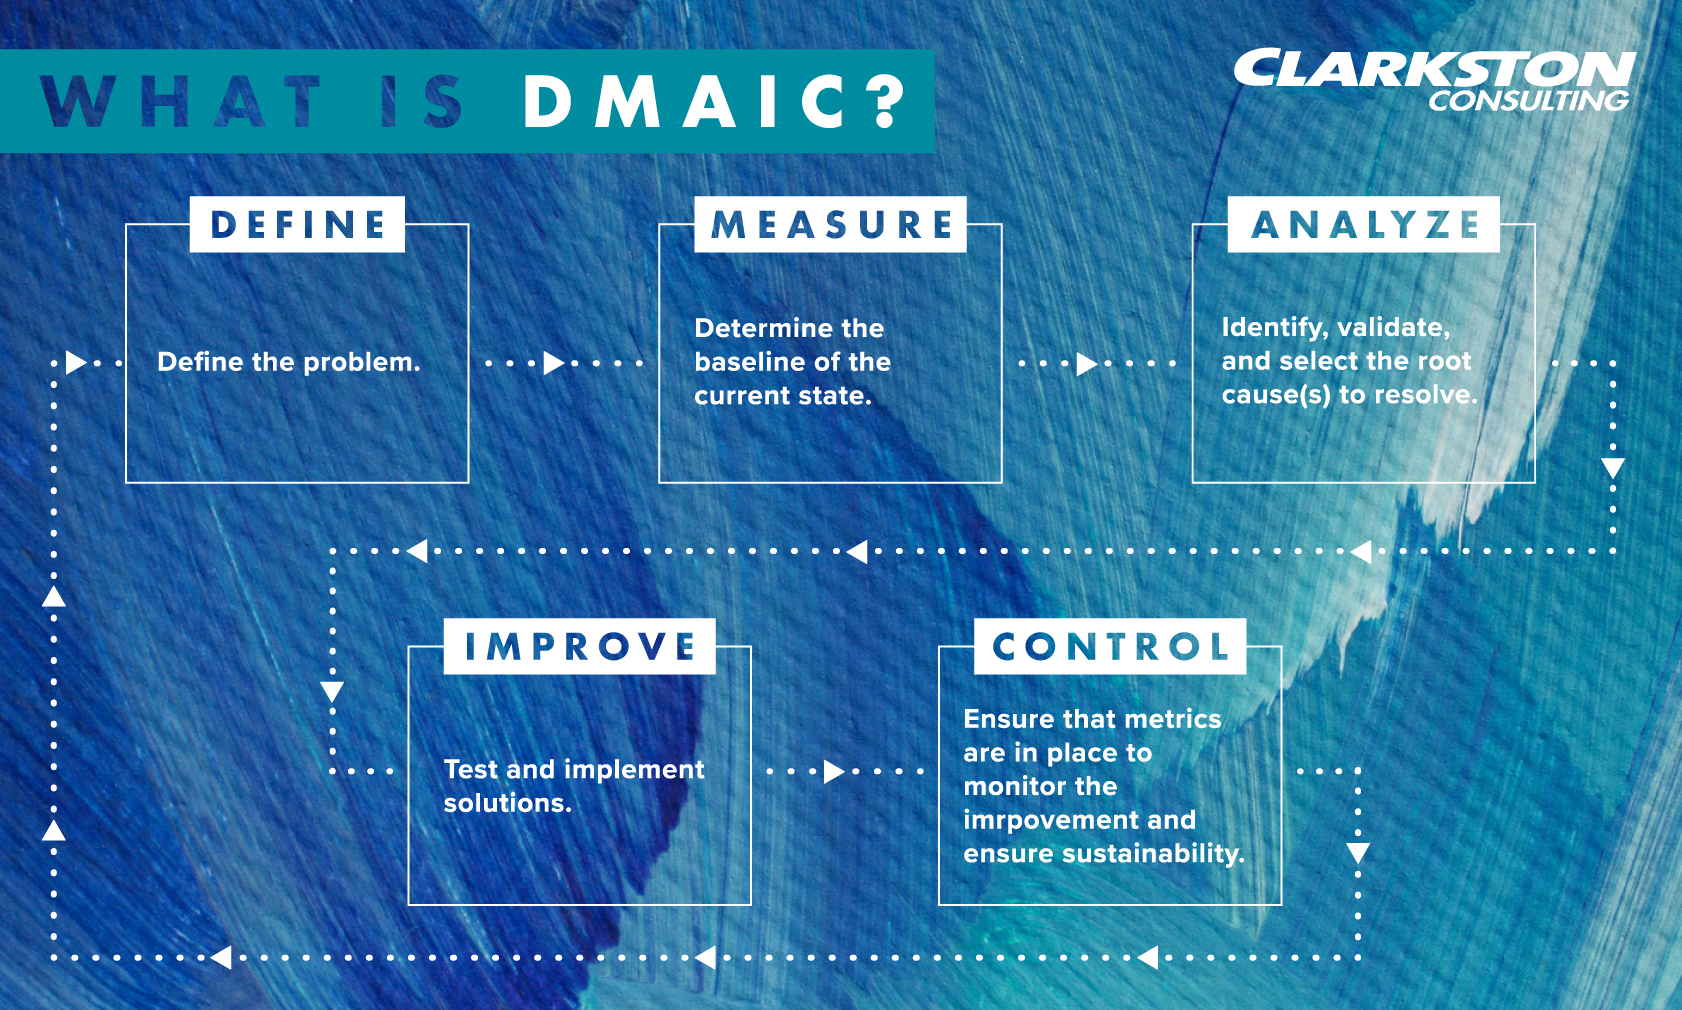 What is DMAIC?